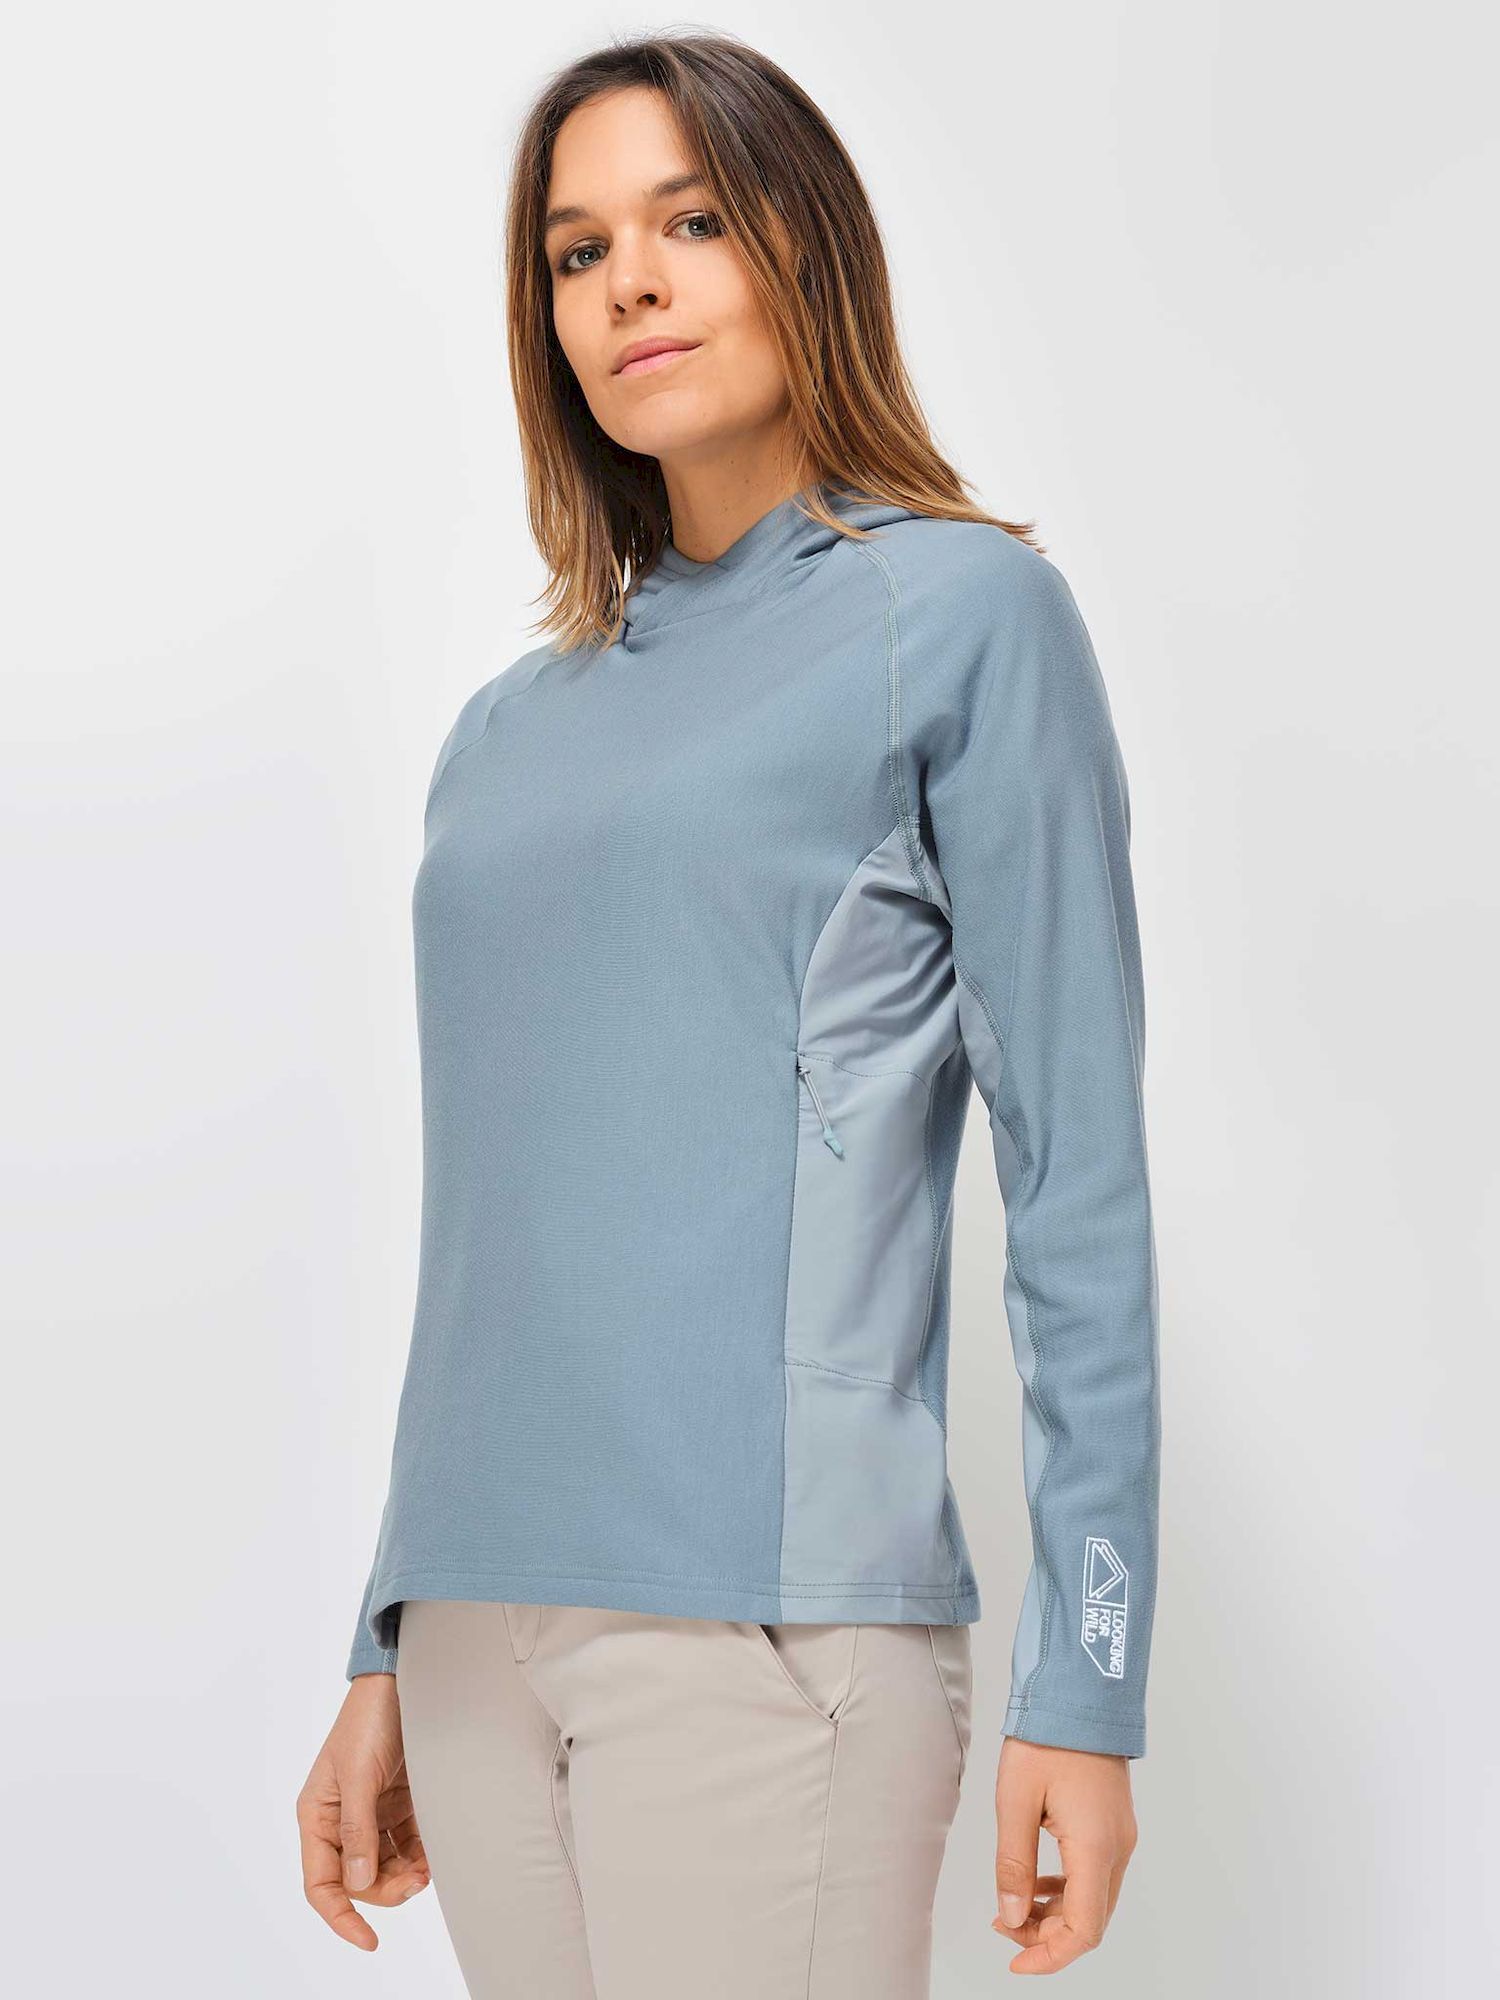 Looking For Wild Central Park - Sudadera - Mujer